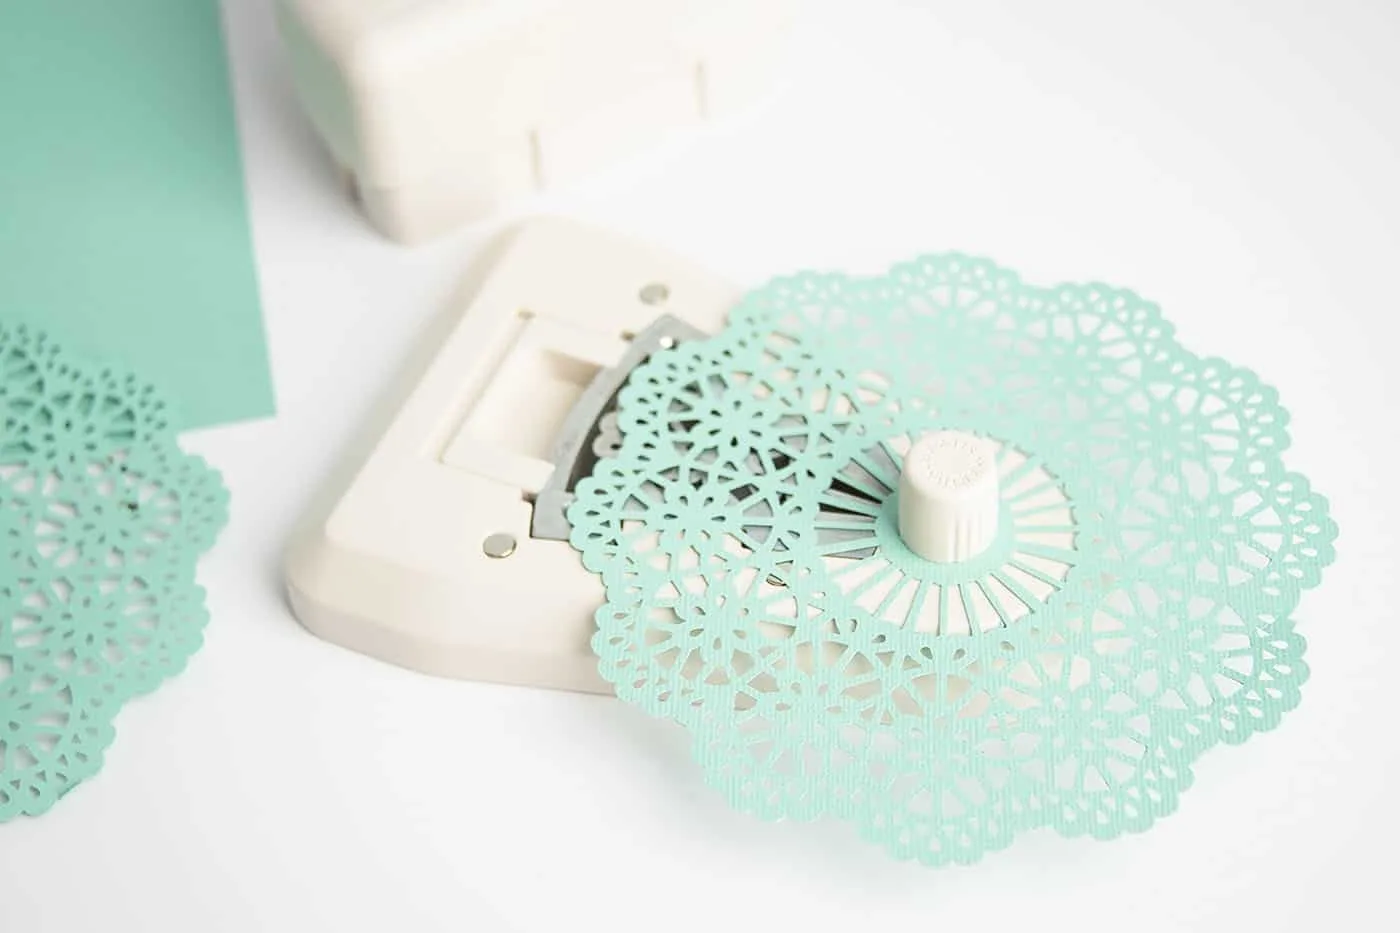 Cutting paper with a doily punch from scrapbook paper